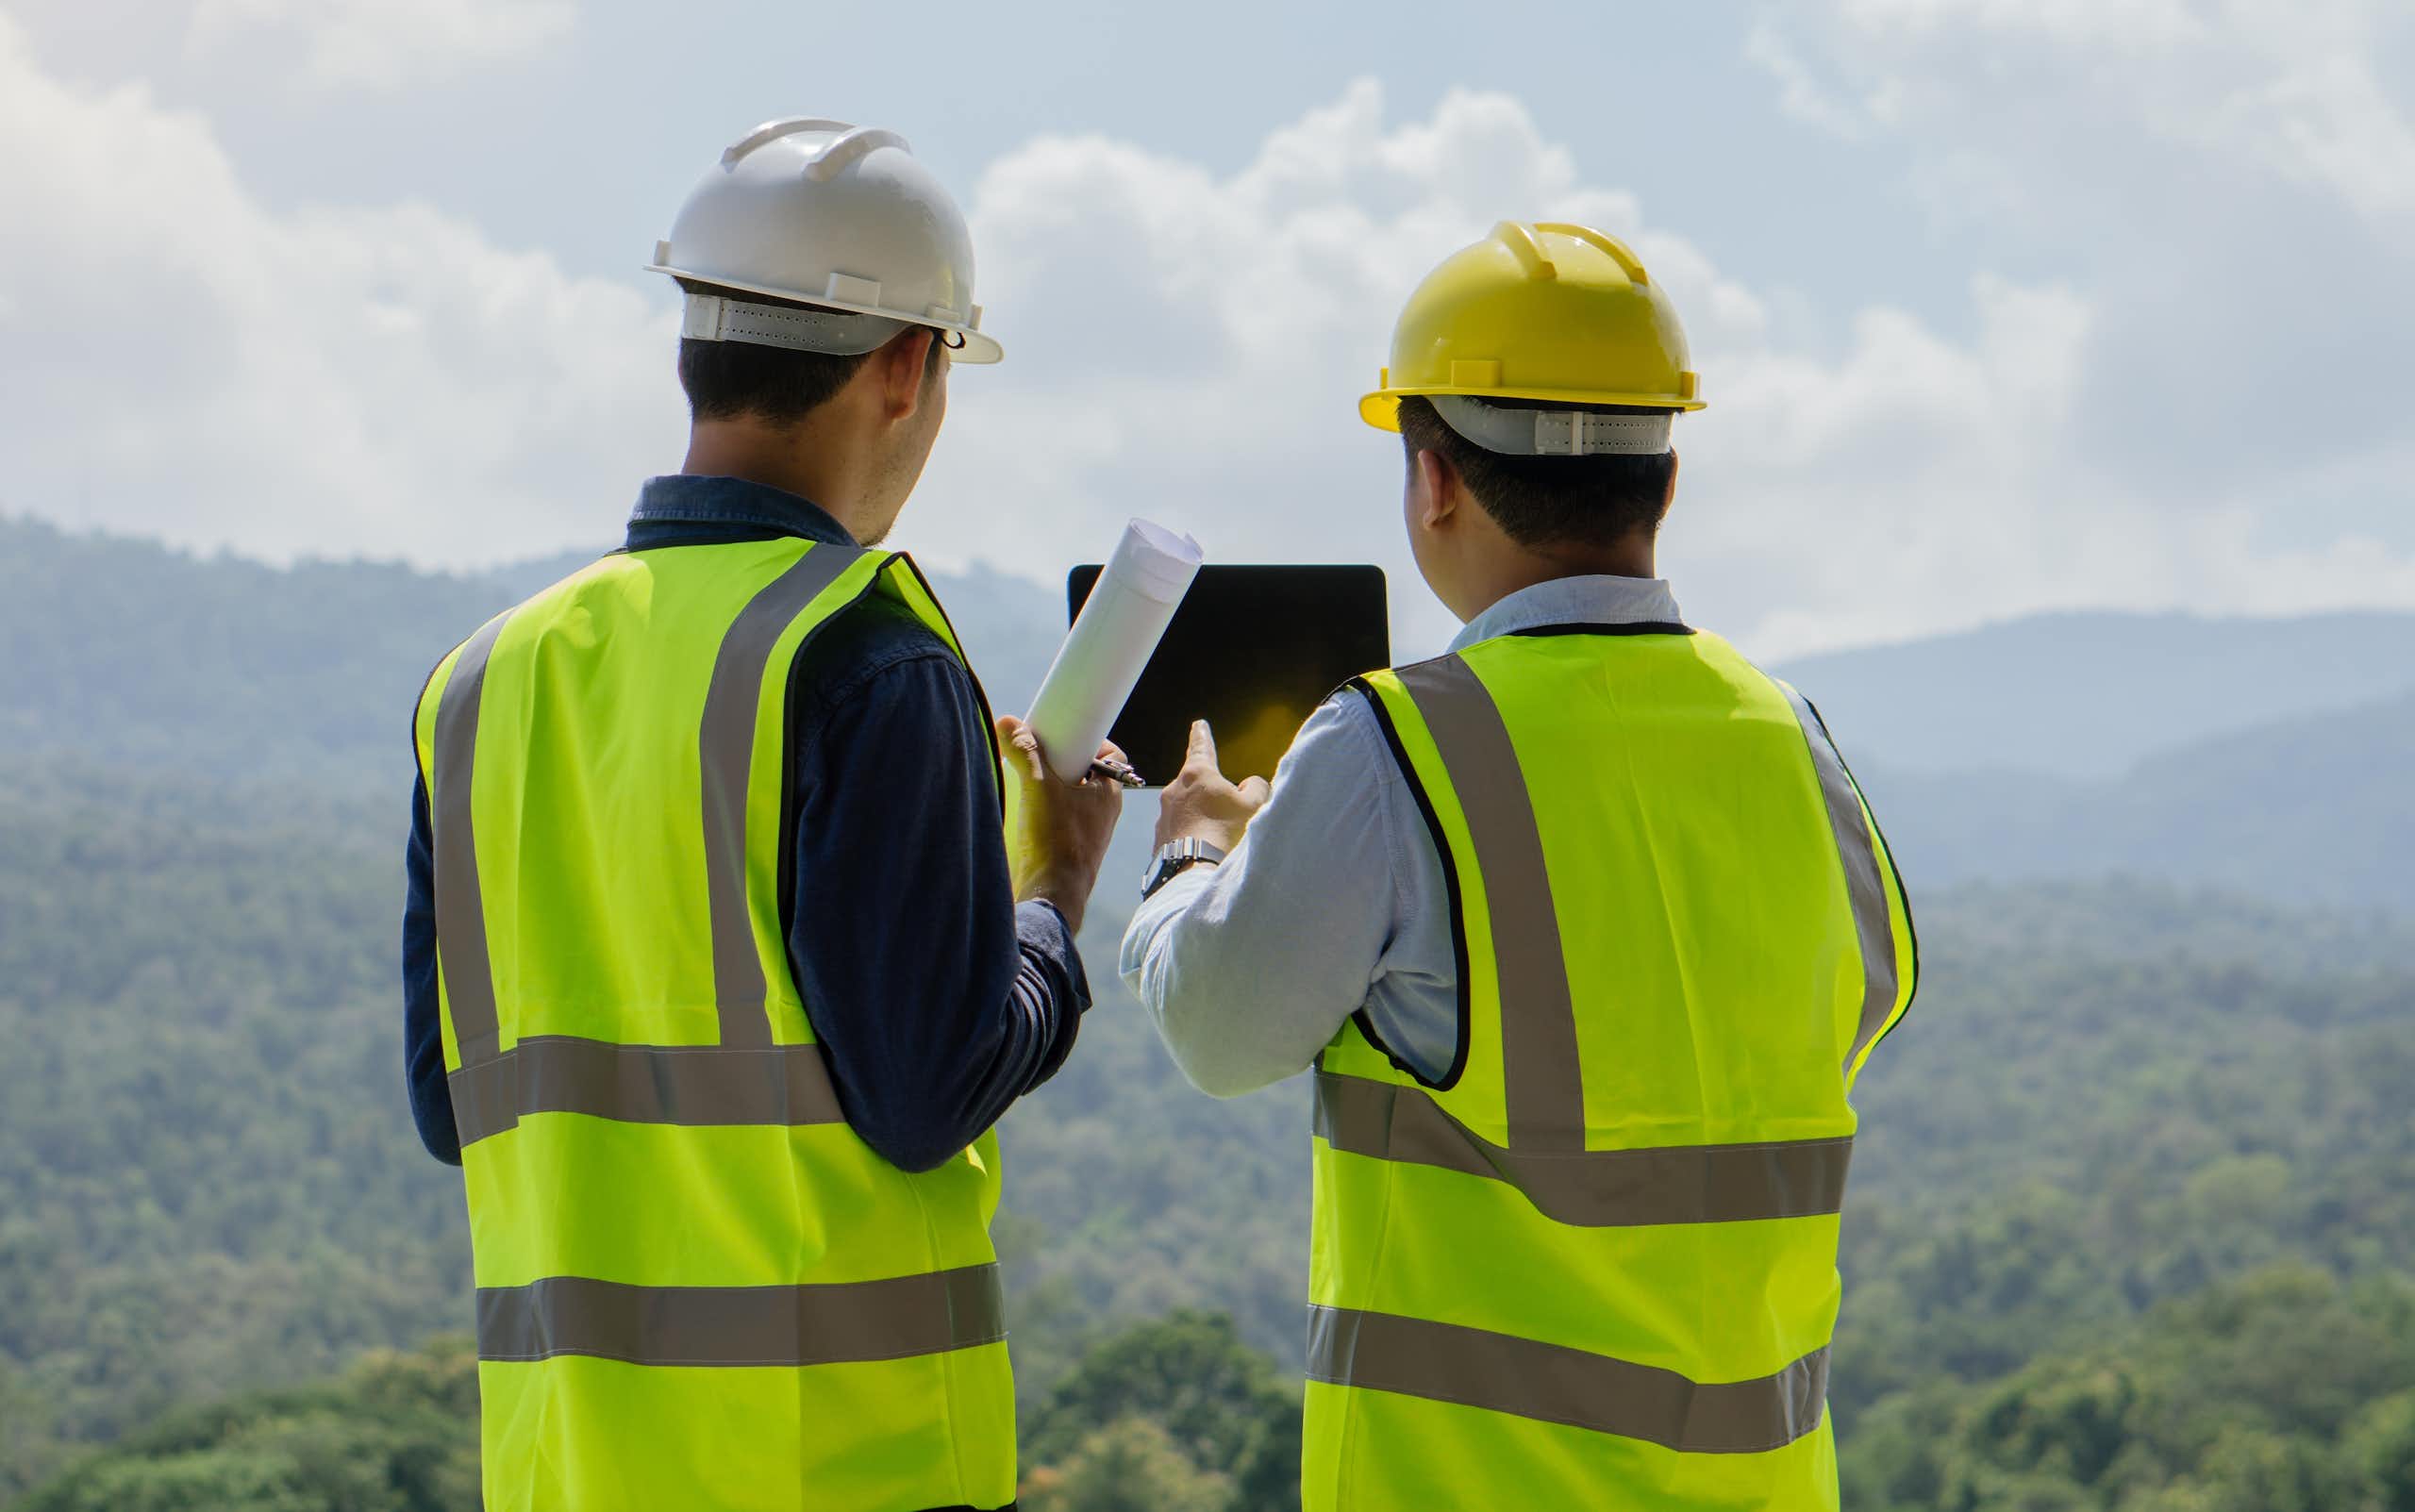 Men in hi-vis vests and hard hats survey a forested area looking at an ipad